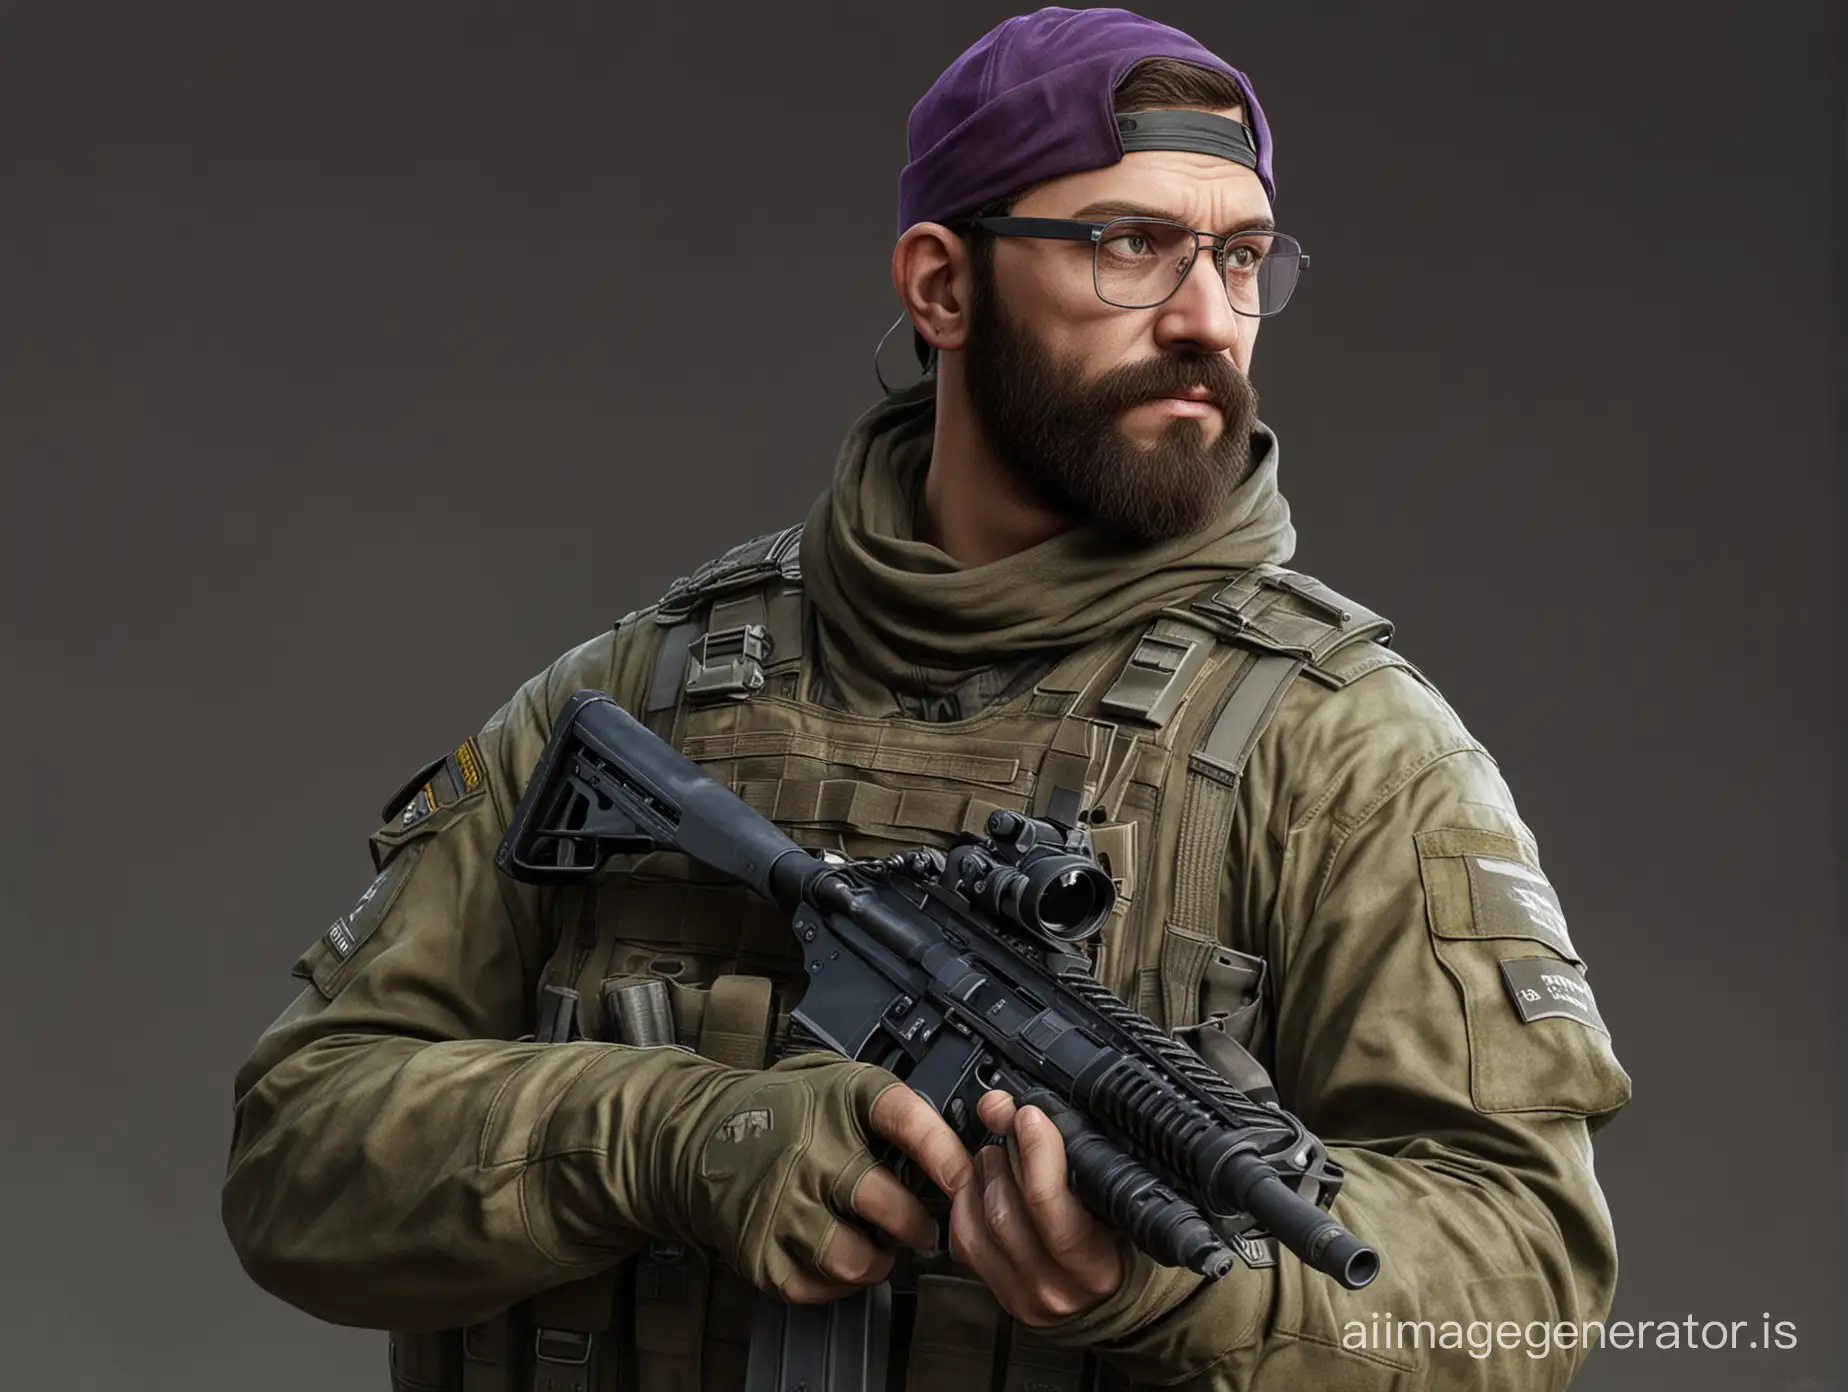 Twitch-Streamer-Frank-Fragger-as-Escape-from-Tarkov-Soldier-in-Purple-80s-Style